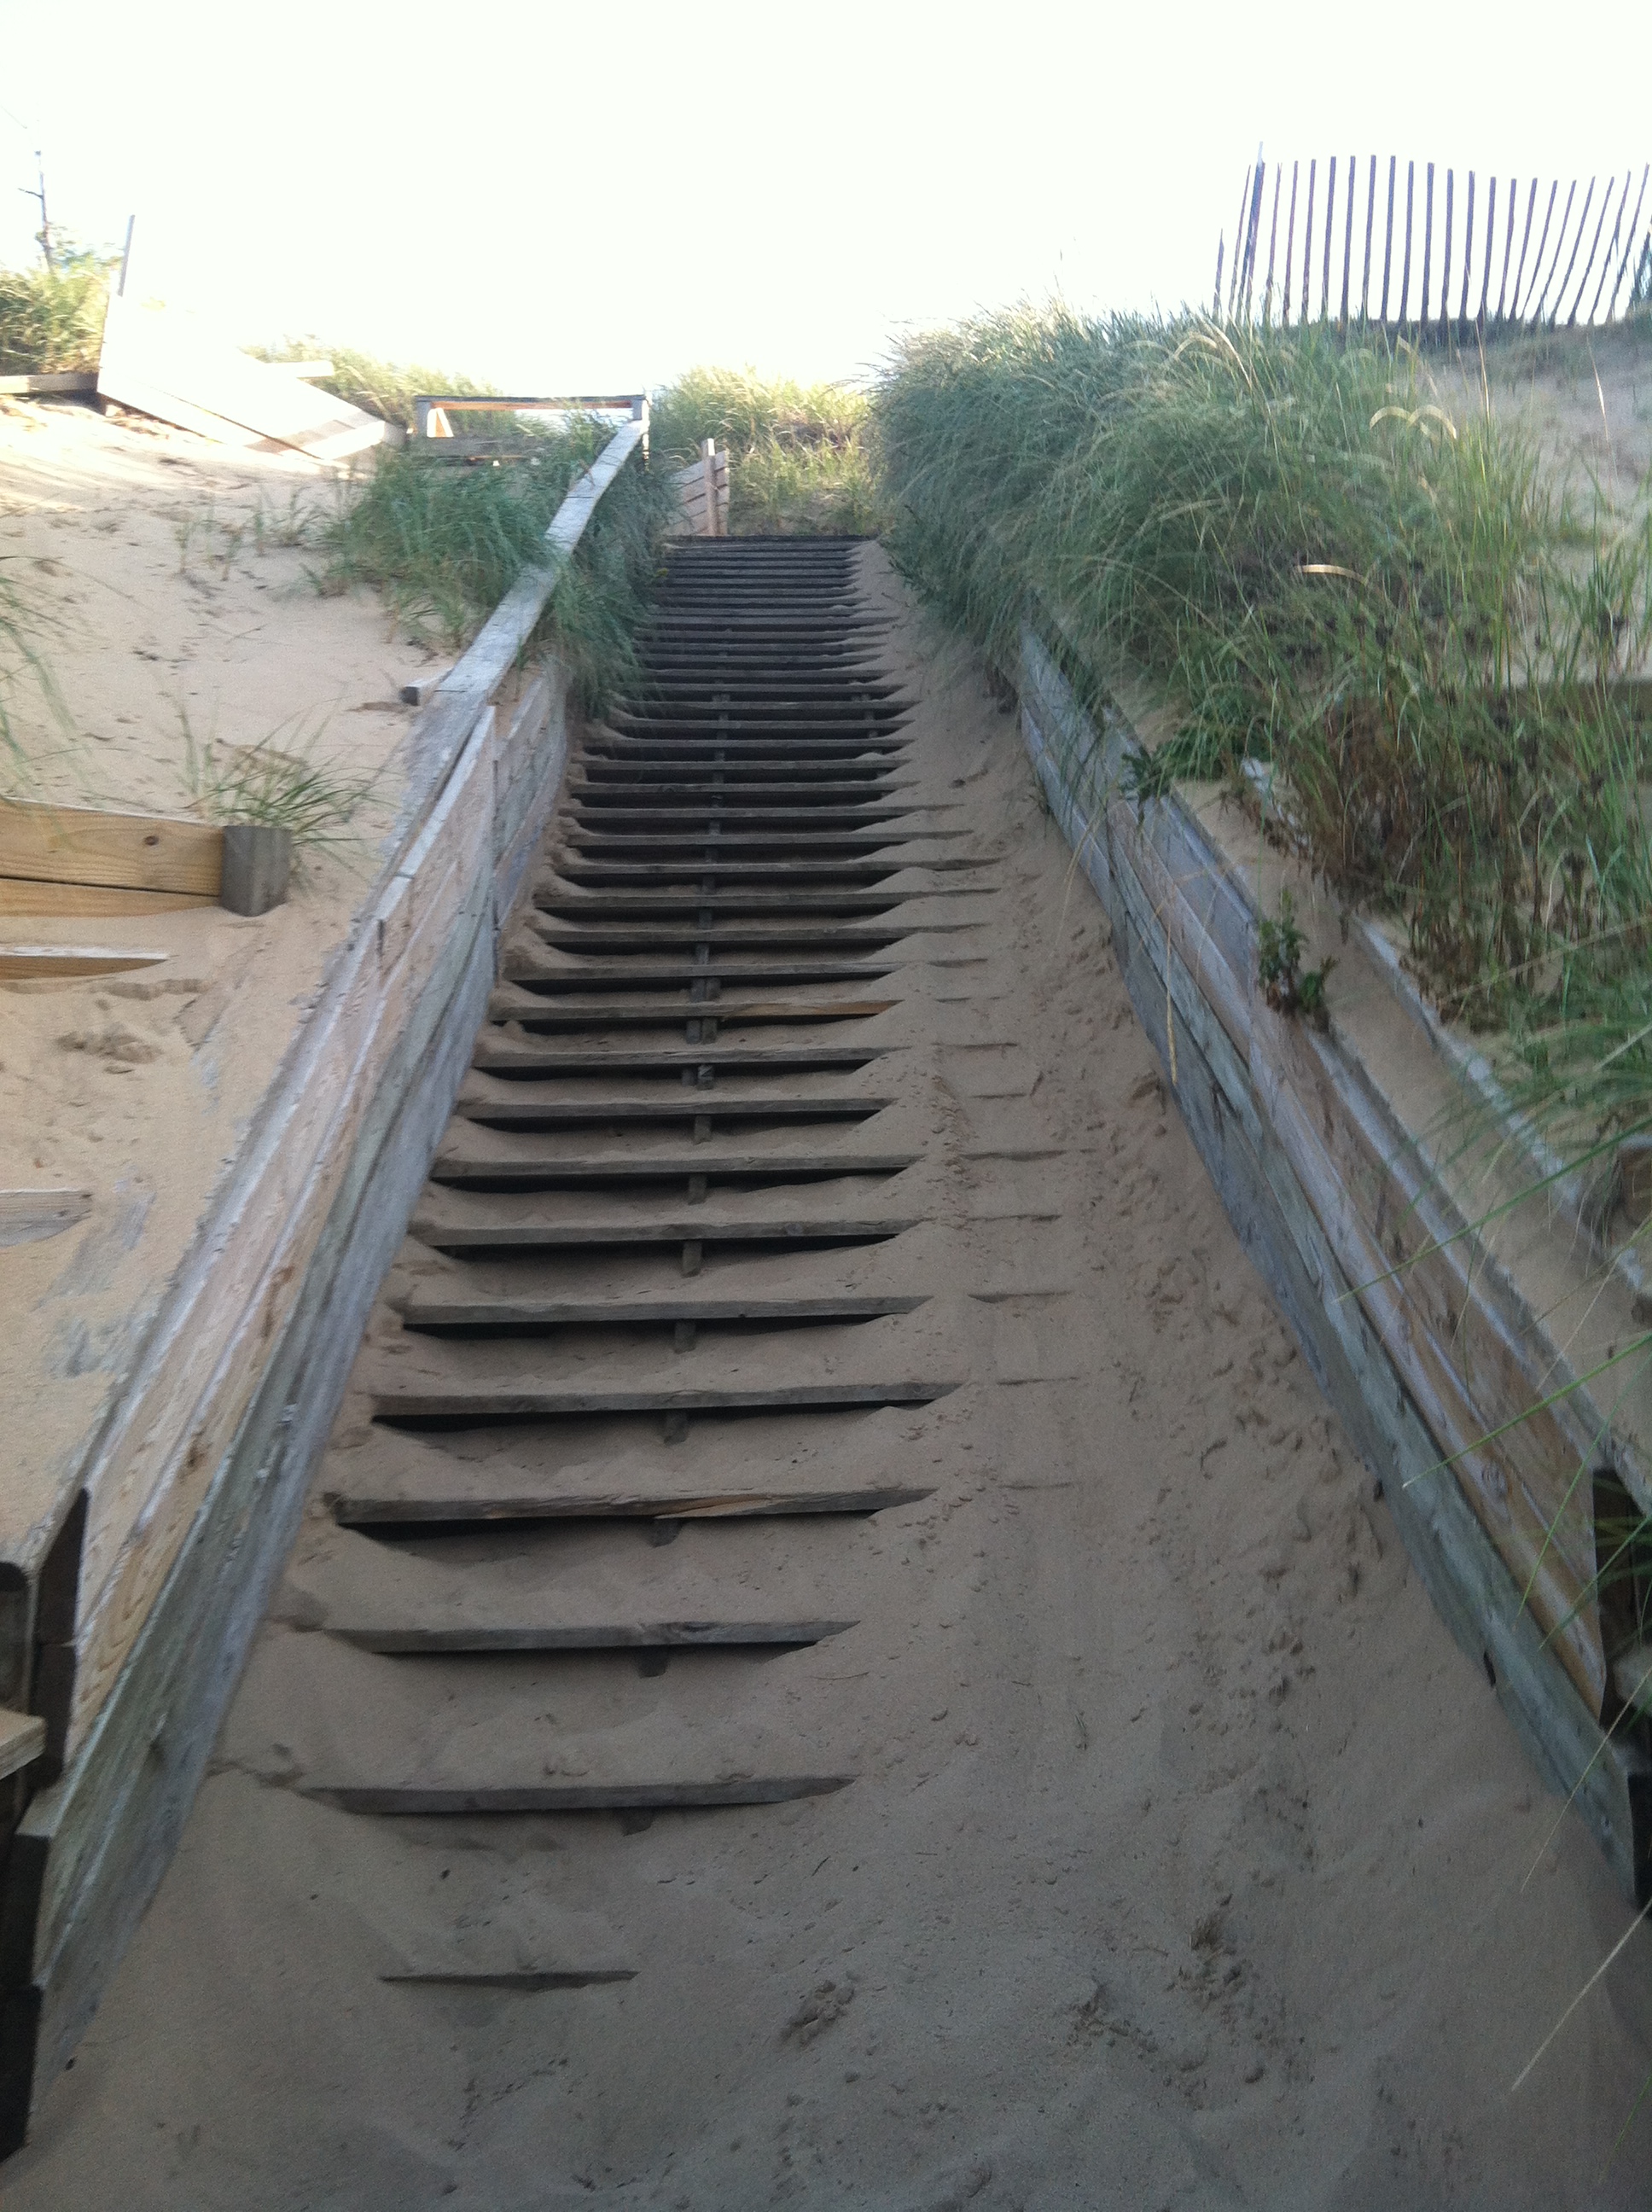 The first staircase up the dune